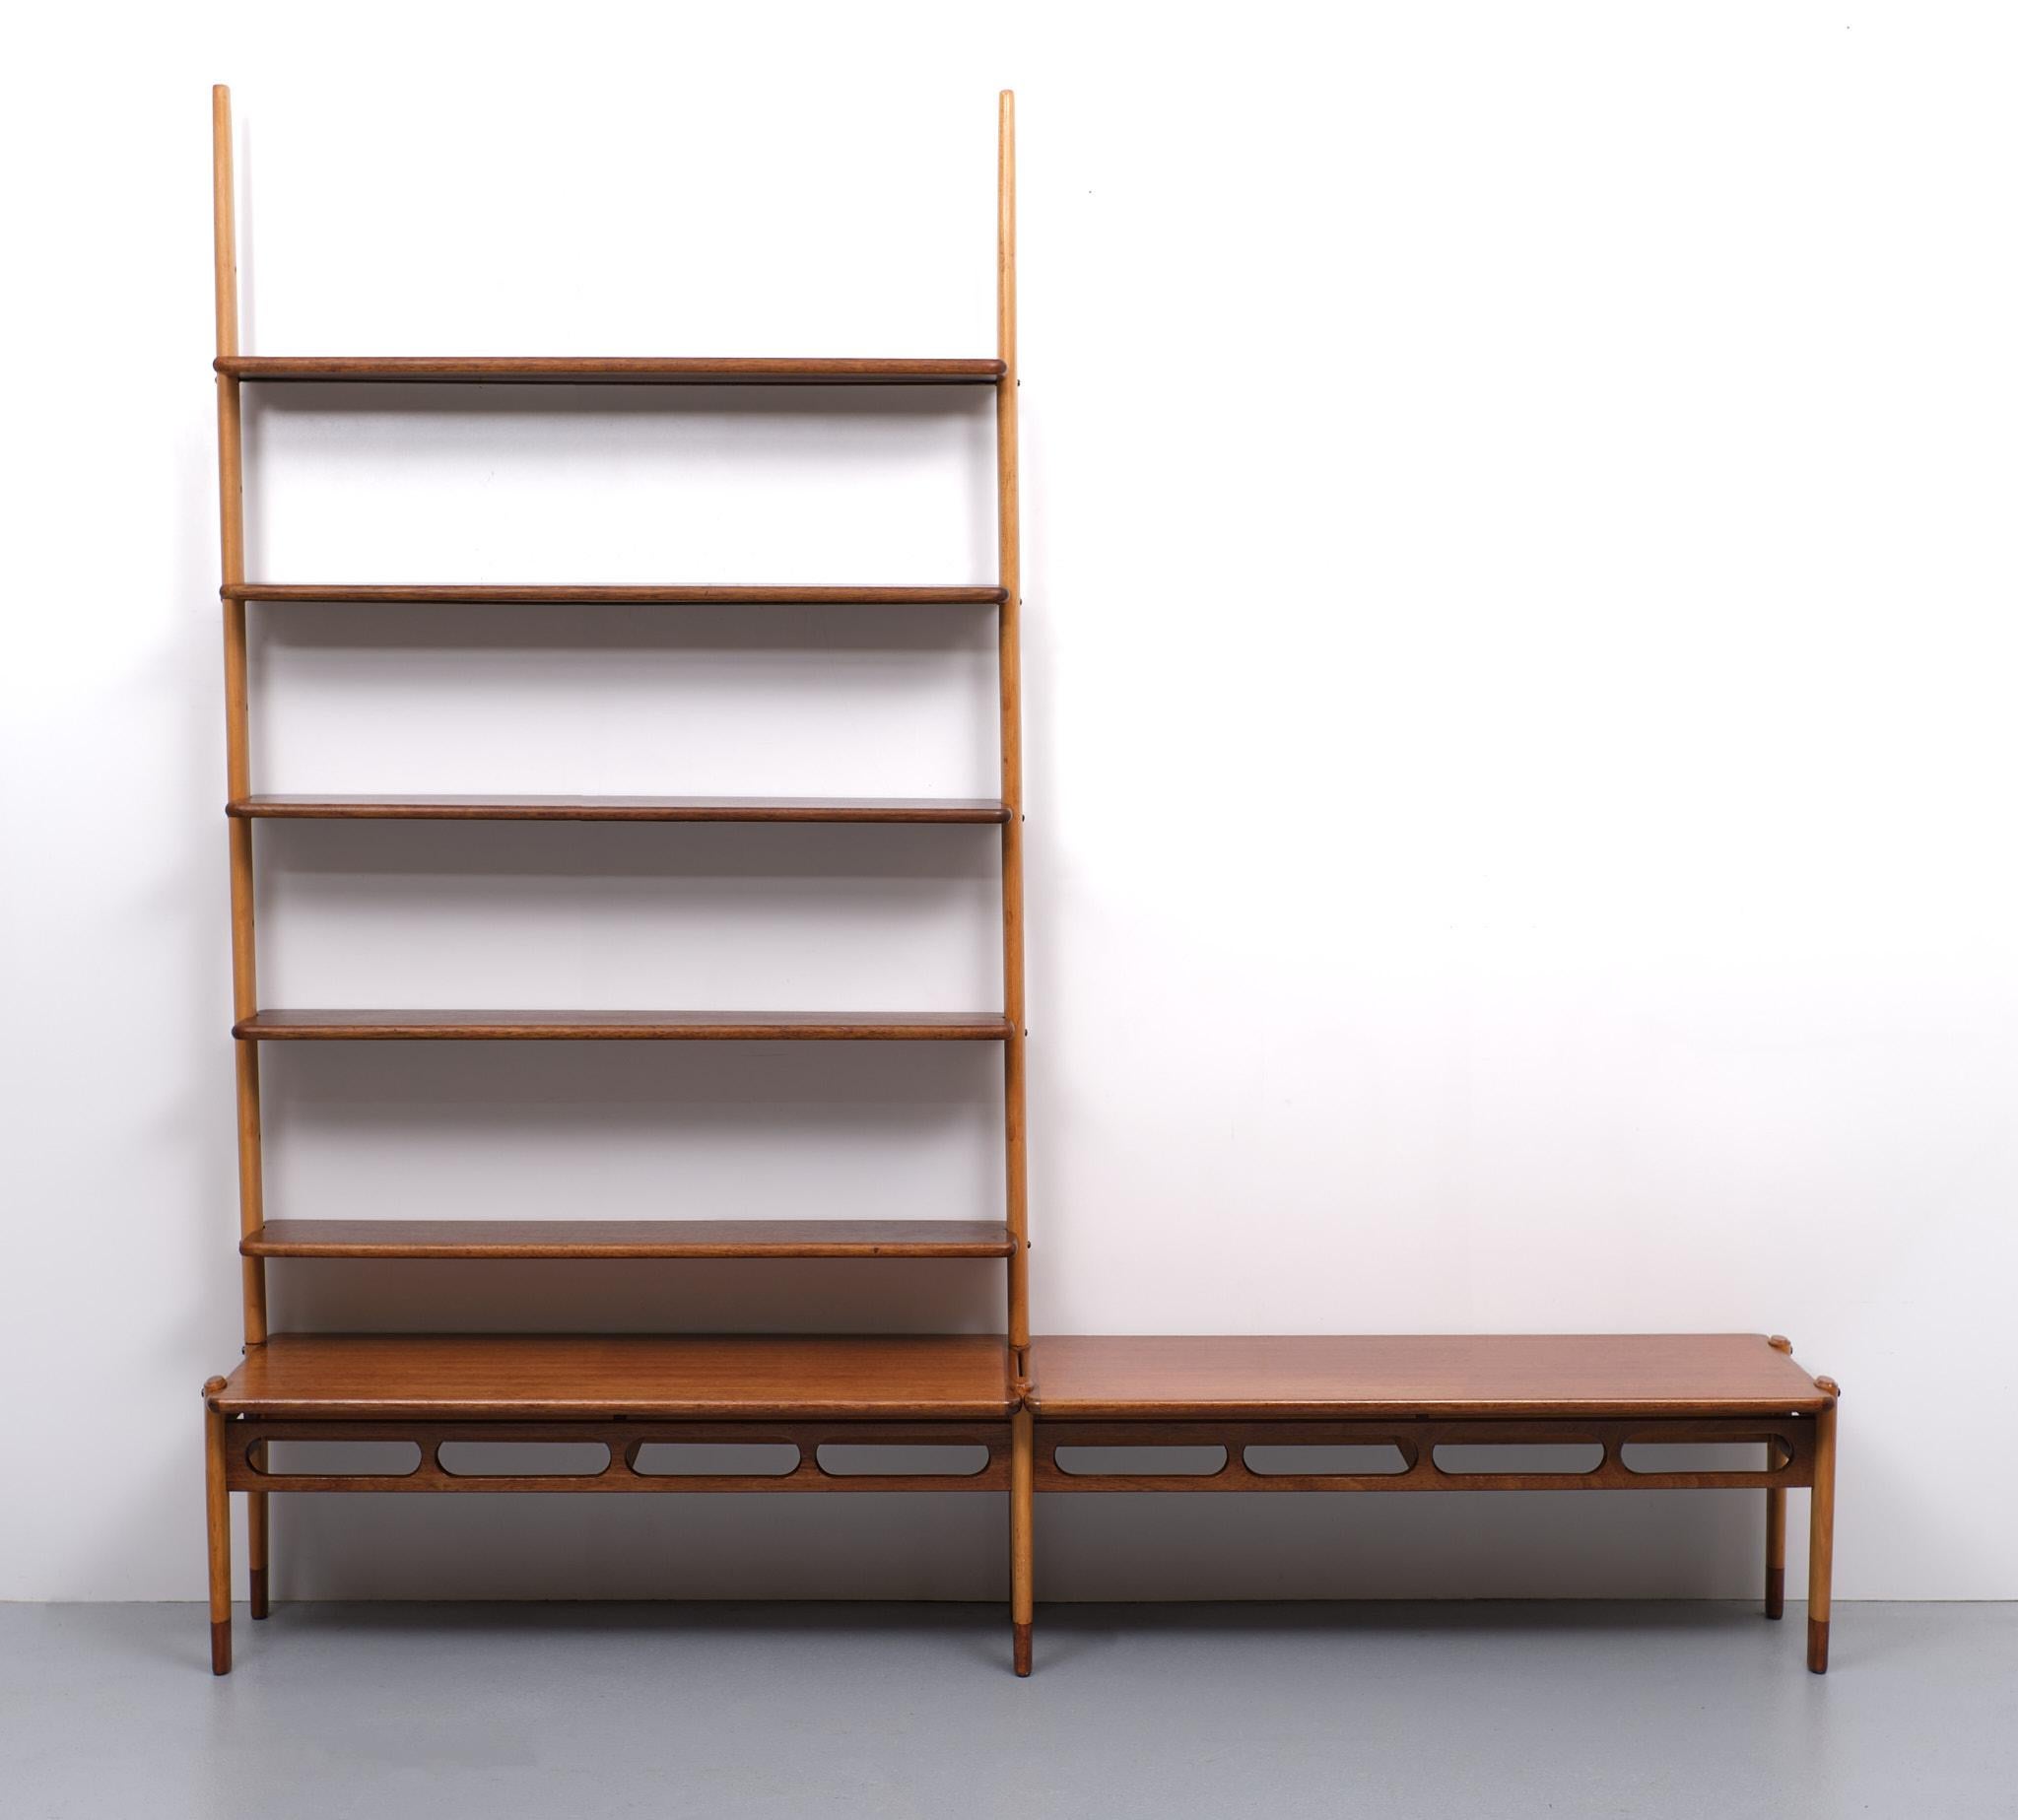 Beautiful modular two-tone wall unit designed by William Watting for Fristho, This open storage unit is made of solid teak shelves and solid beech uprights. . features an ingenious system for attaching the shelves to the risers. The shelves can be